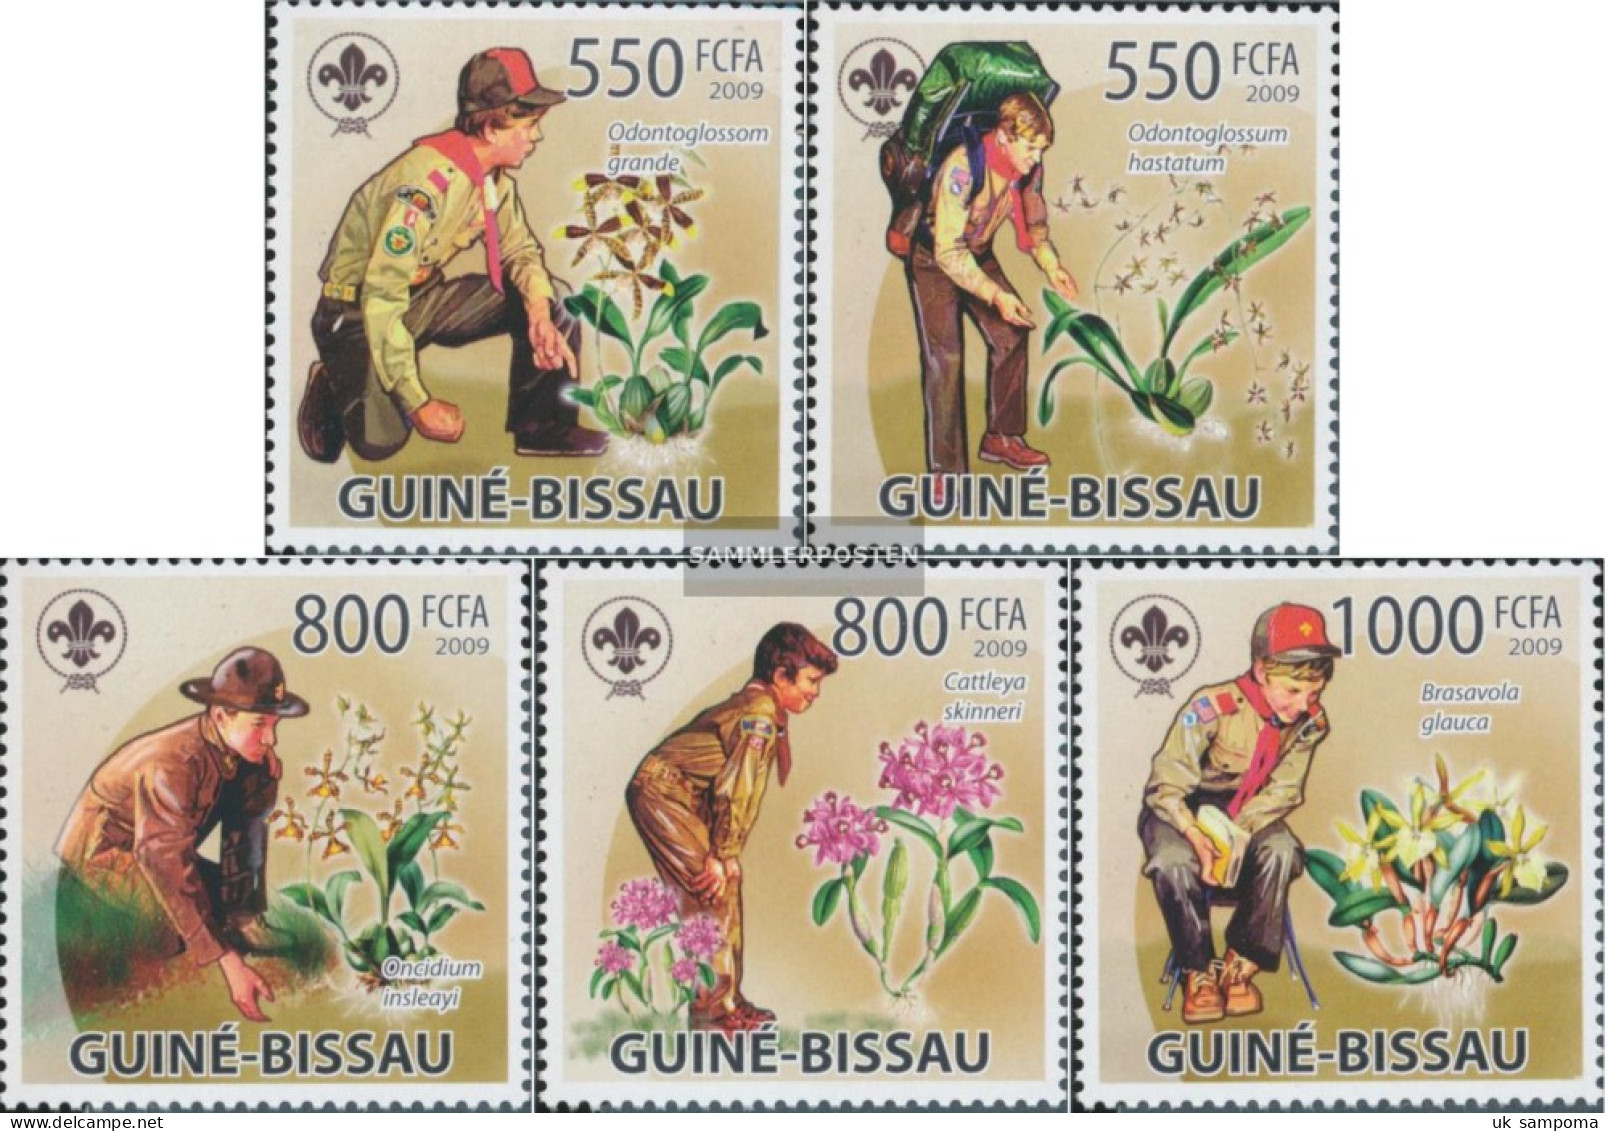 Guinea-Bissau 4355-4359 (complete. Issue) Unmounted Mint / Never Hinged 2009 Scouts & Orchids - Guinea-Bissau